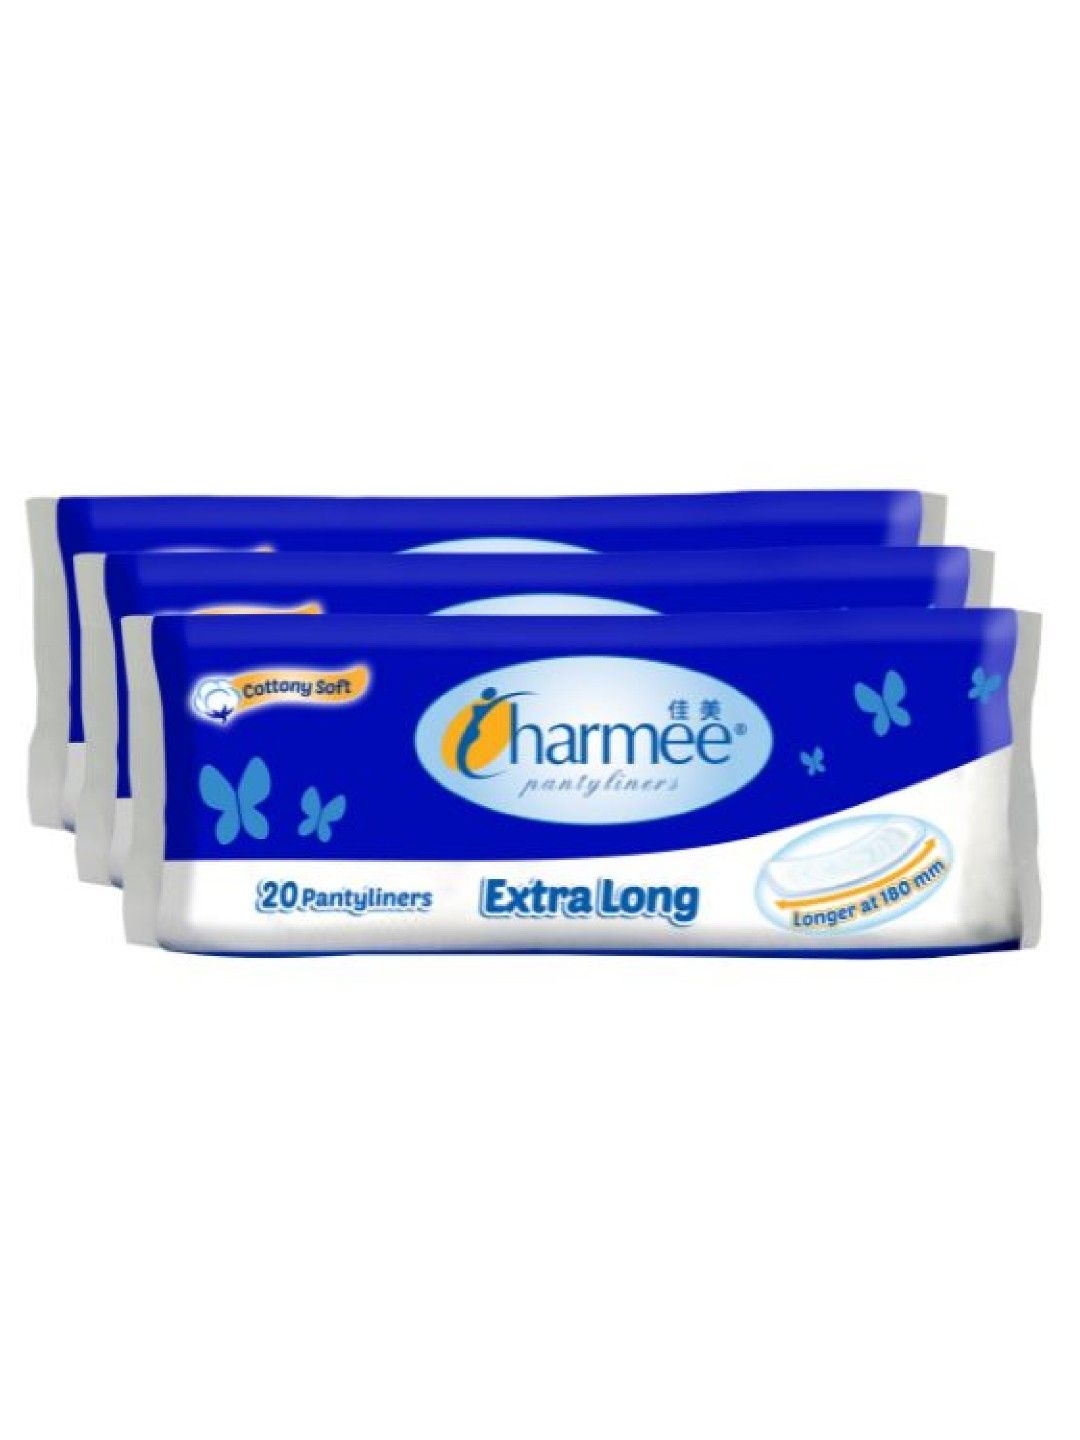 Charmee Extra Long Pantyliner 20's (3-pack) (No Color- Image 1)